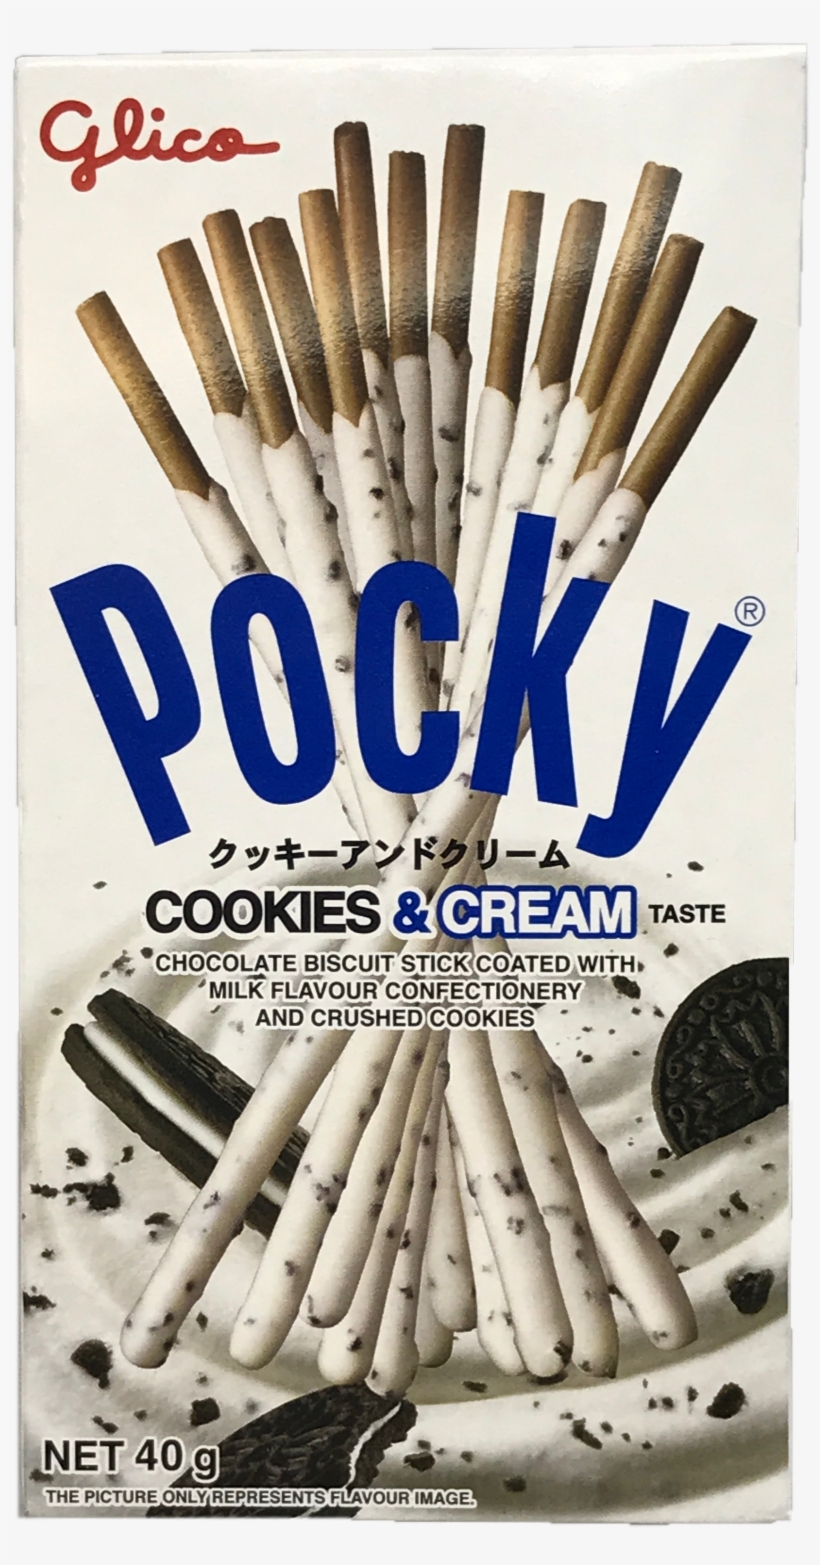 Glico Pocky Cookies & Cream 40g - Cookie And Cream Flavor Pocky, transparent png #1852412